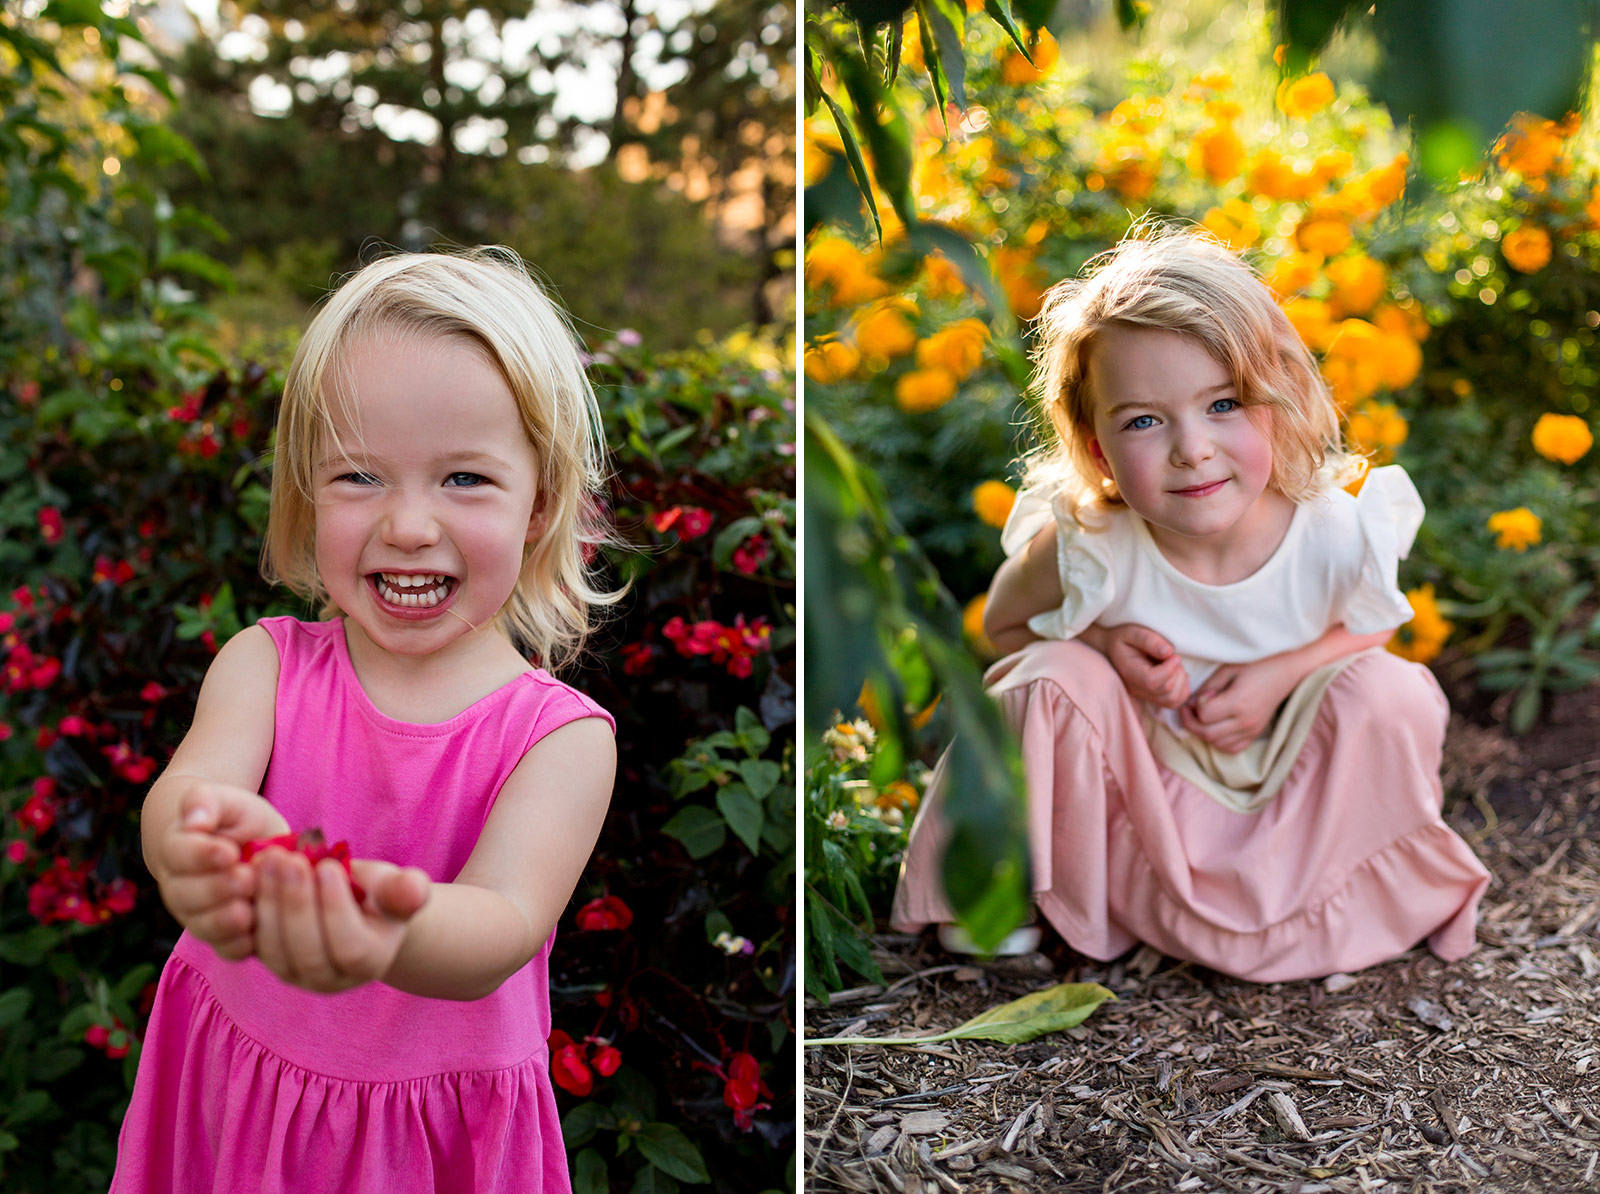 Rose happily holds out some flower petals, and Henrietta crouches by orange flowers.